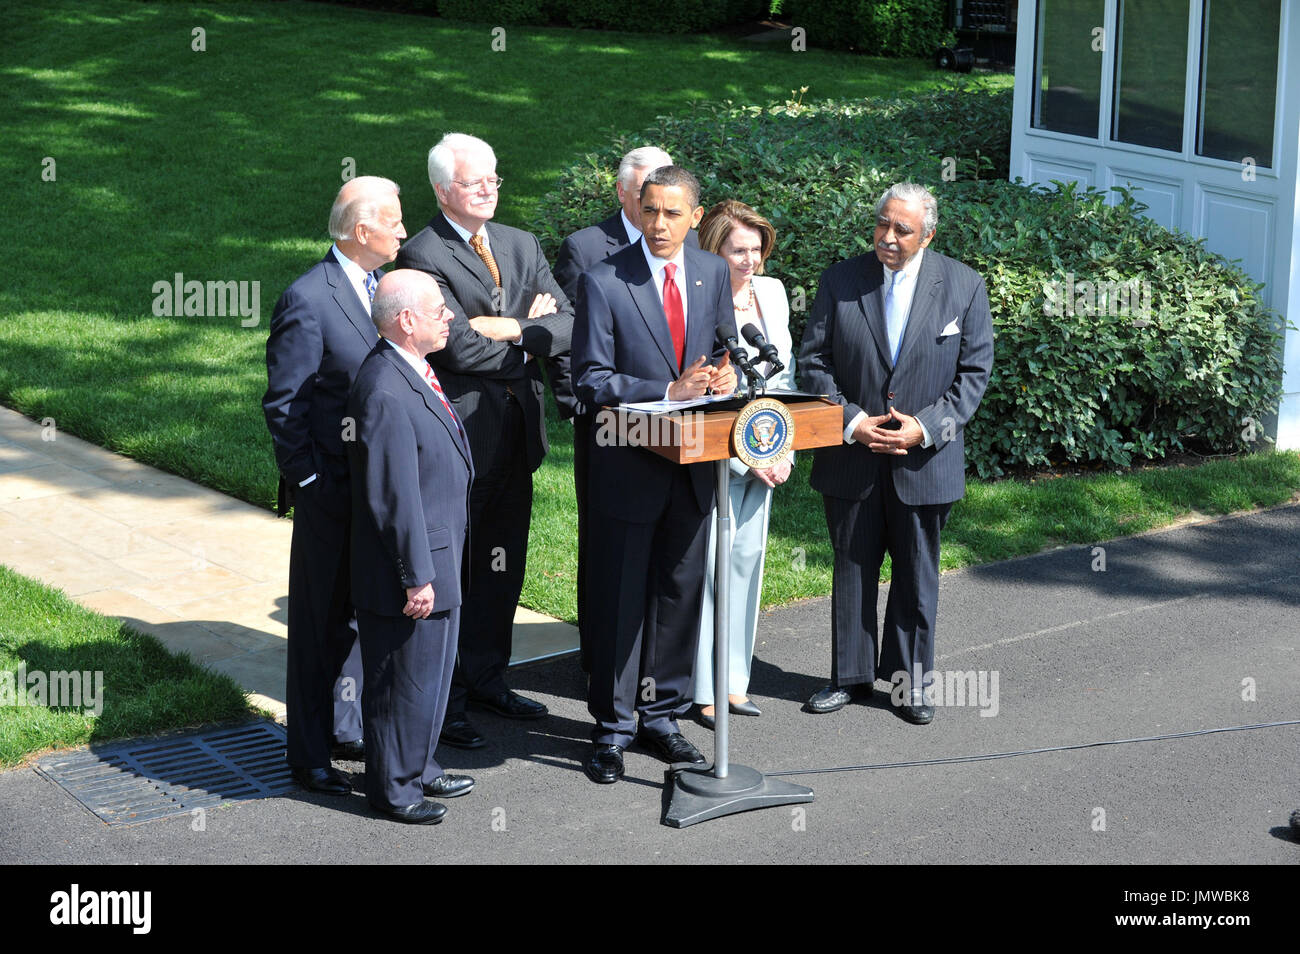 Washington, D.C. - May 13, 2009 -- United States President Barack Obama, surrounded by Democratic Congressional Leaders, delivers a statement calling for action on health care reform on the South Lawn outside the Oval Office on Wednesday, May 13, 2009.  From left to right: U.S. Representative Henry Waxman (Democrat of California), Chairman, House Energy and Commerce Committee; Vice President Joseph Biden; U.S. Representative George Miller (Democrat of California), Chairman, House Committee on Education and Labor;  President Obama; U.S. House Majority Leader Steny Hoyer (Democrat of Maryland);  Stock Photo